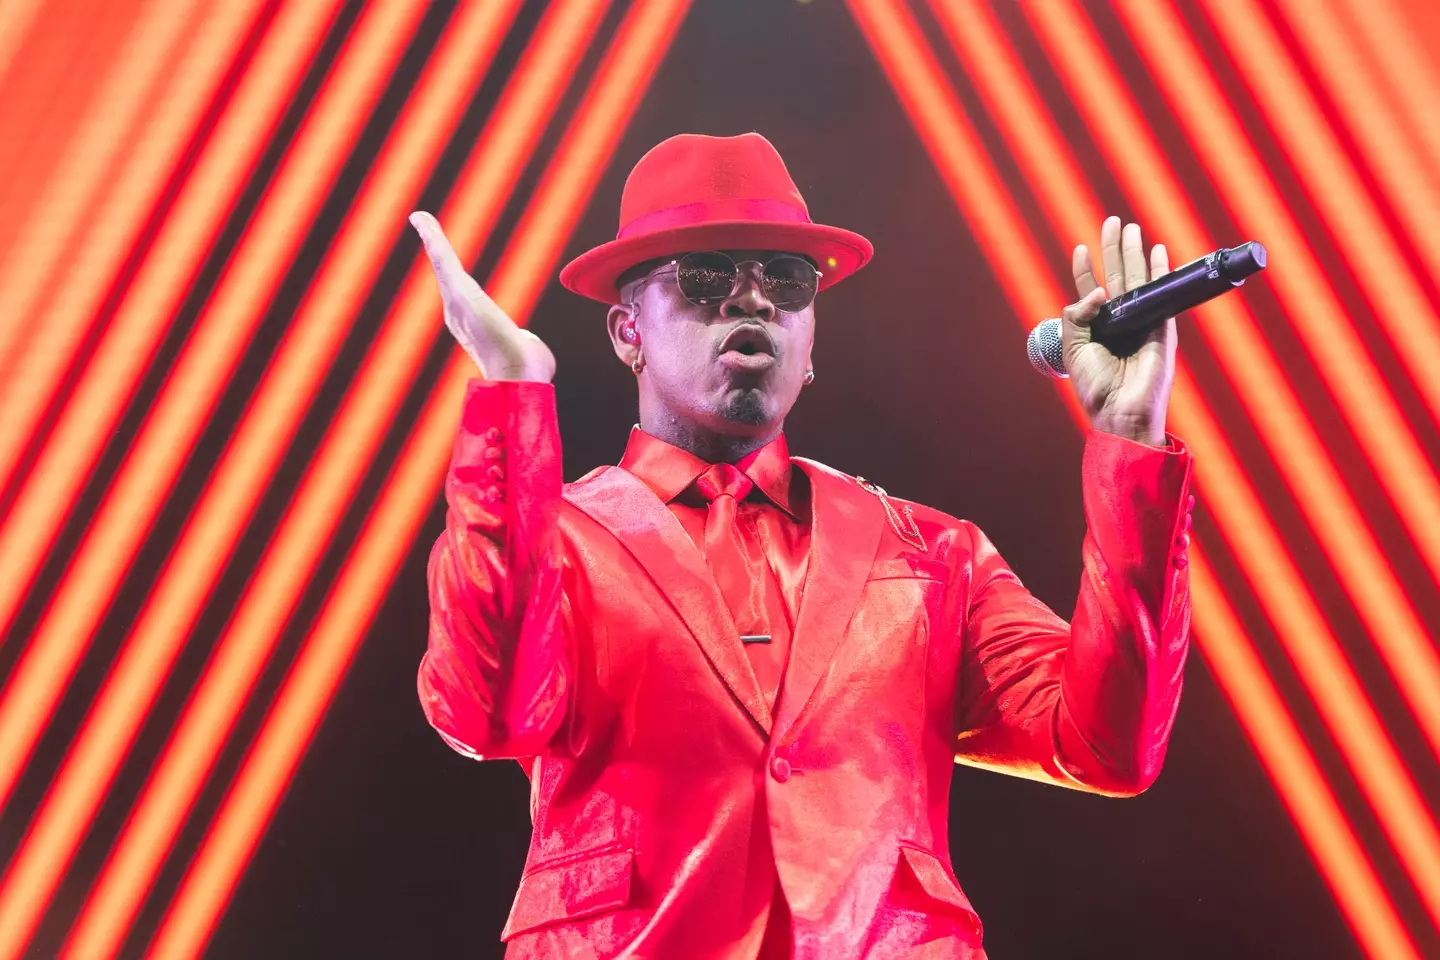 Ne-Yo spoke about the issue while holding hands with two partners. (Roberto Ricciuti/Redferns)